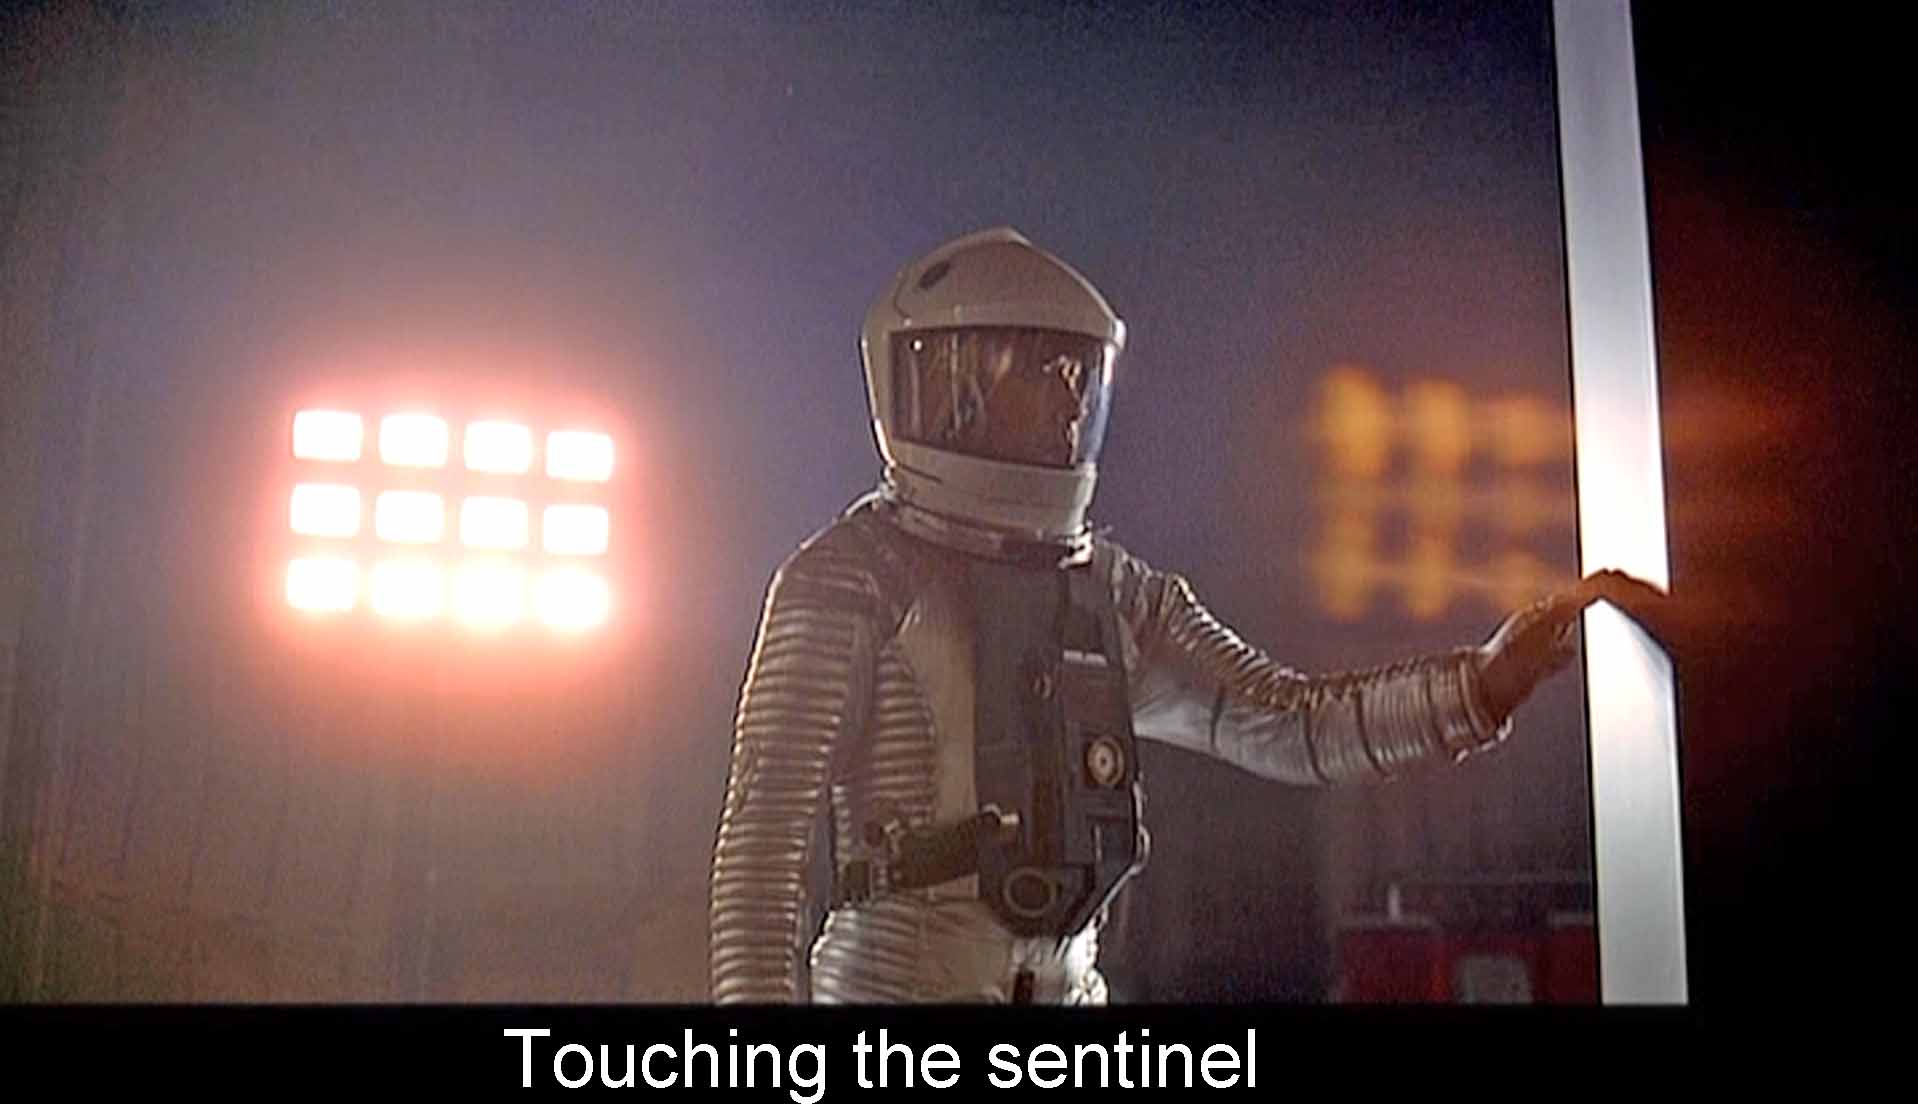 Touching the sentinel